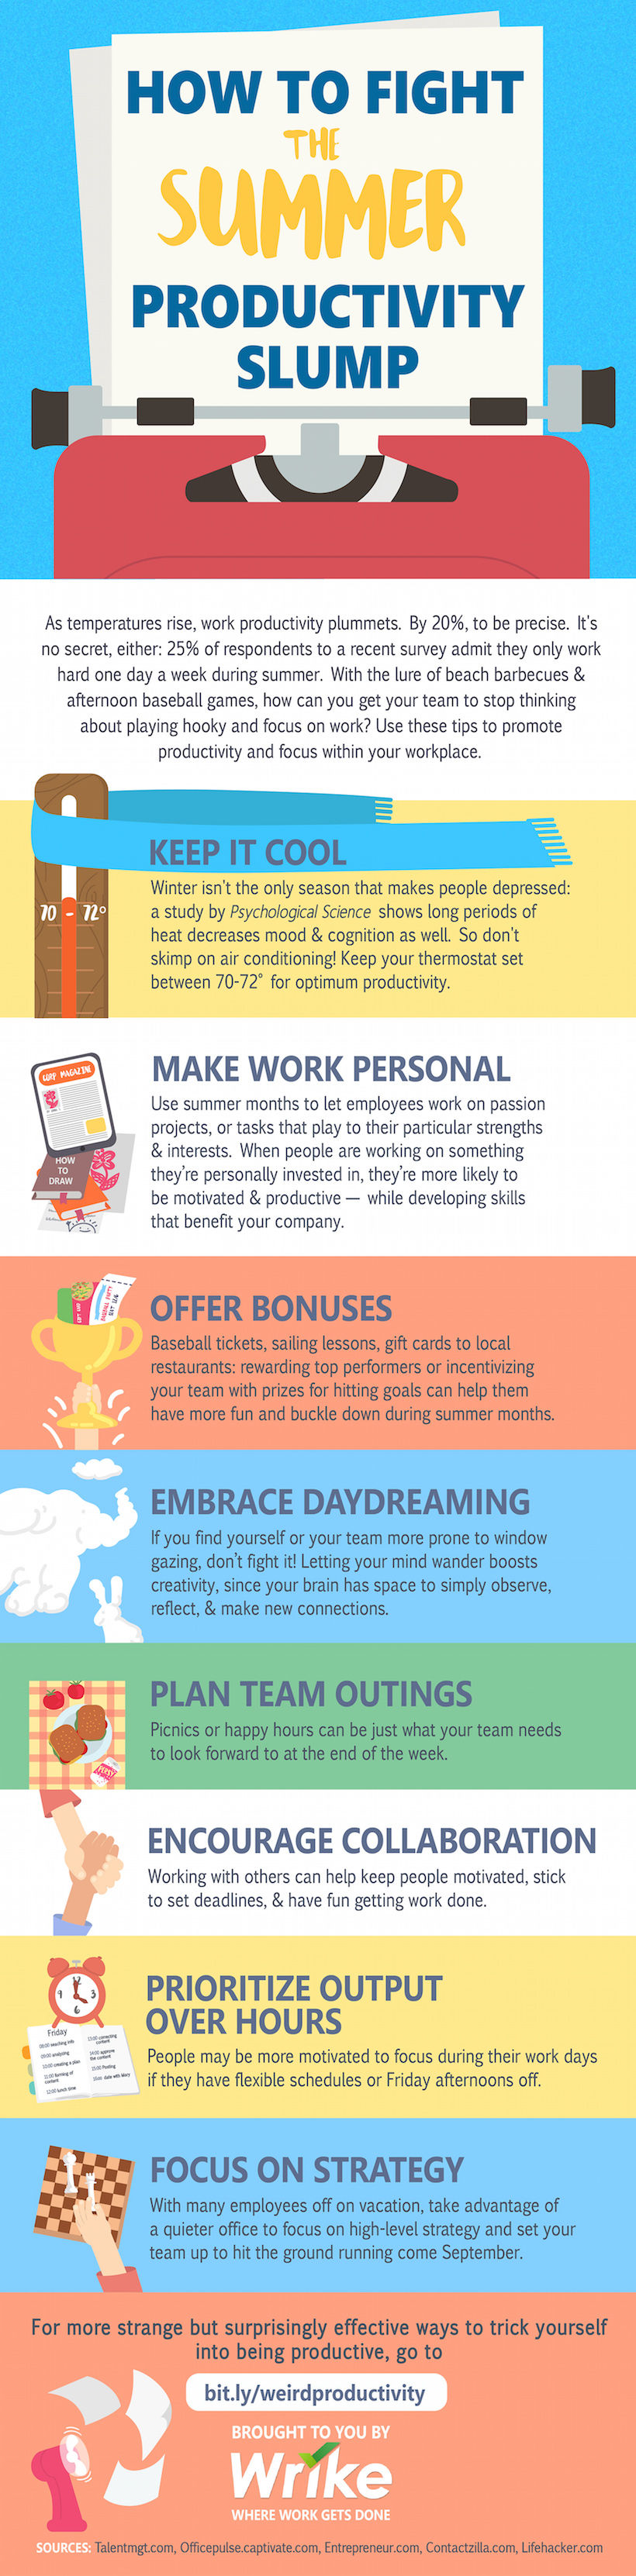 8 Tips to Fight the Summer Productivity Slump (Infographic)